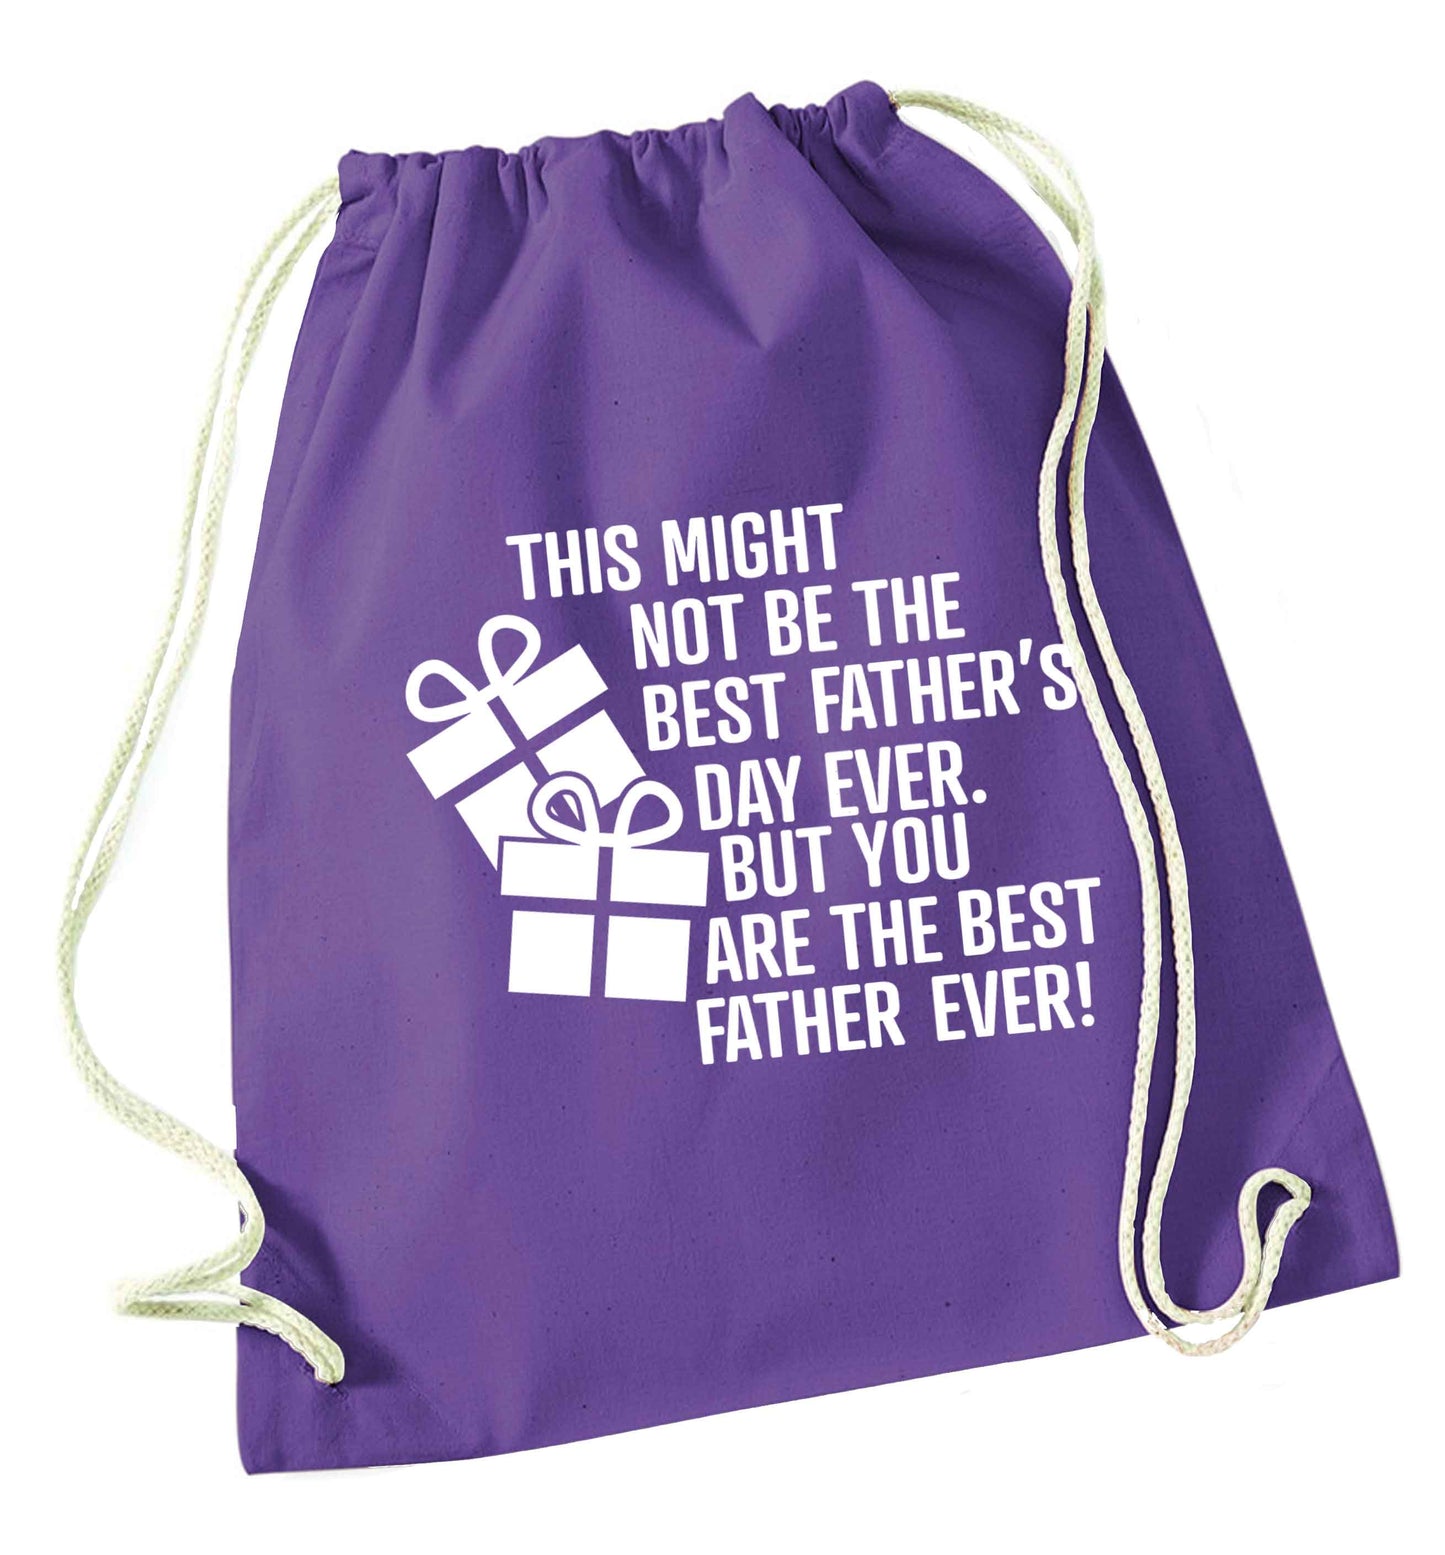 It might not be the best Father's Day ever but you are the best father ever! purple drawstring bag